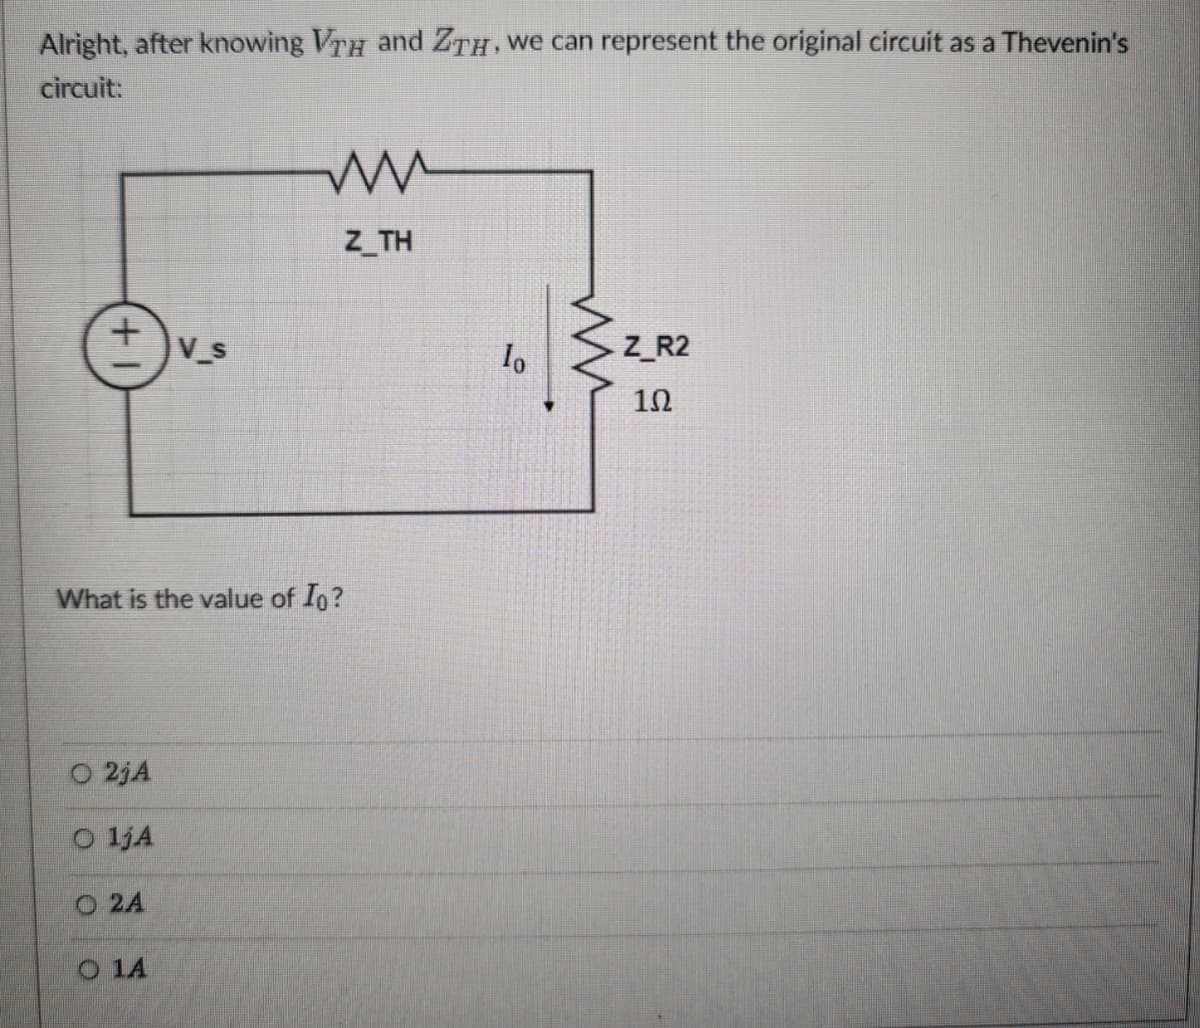 Alright, after knowing VTH and ZTH, we can represent the original circuit as a Thevenin's
circuit:
ww
Z_TH
+1
V_s
What is the value of Io?
O 2jA
O 1jA
O 2A
O 1A
lo
ww
Z_R2
10